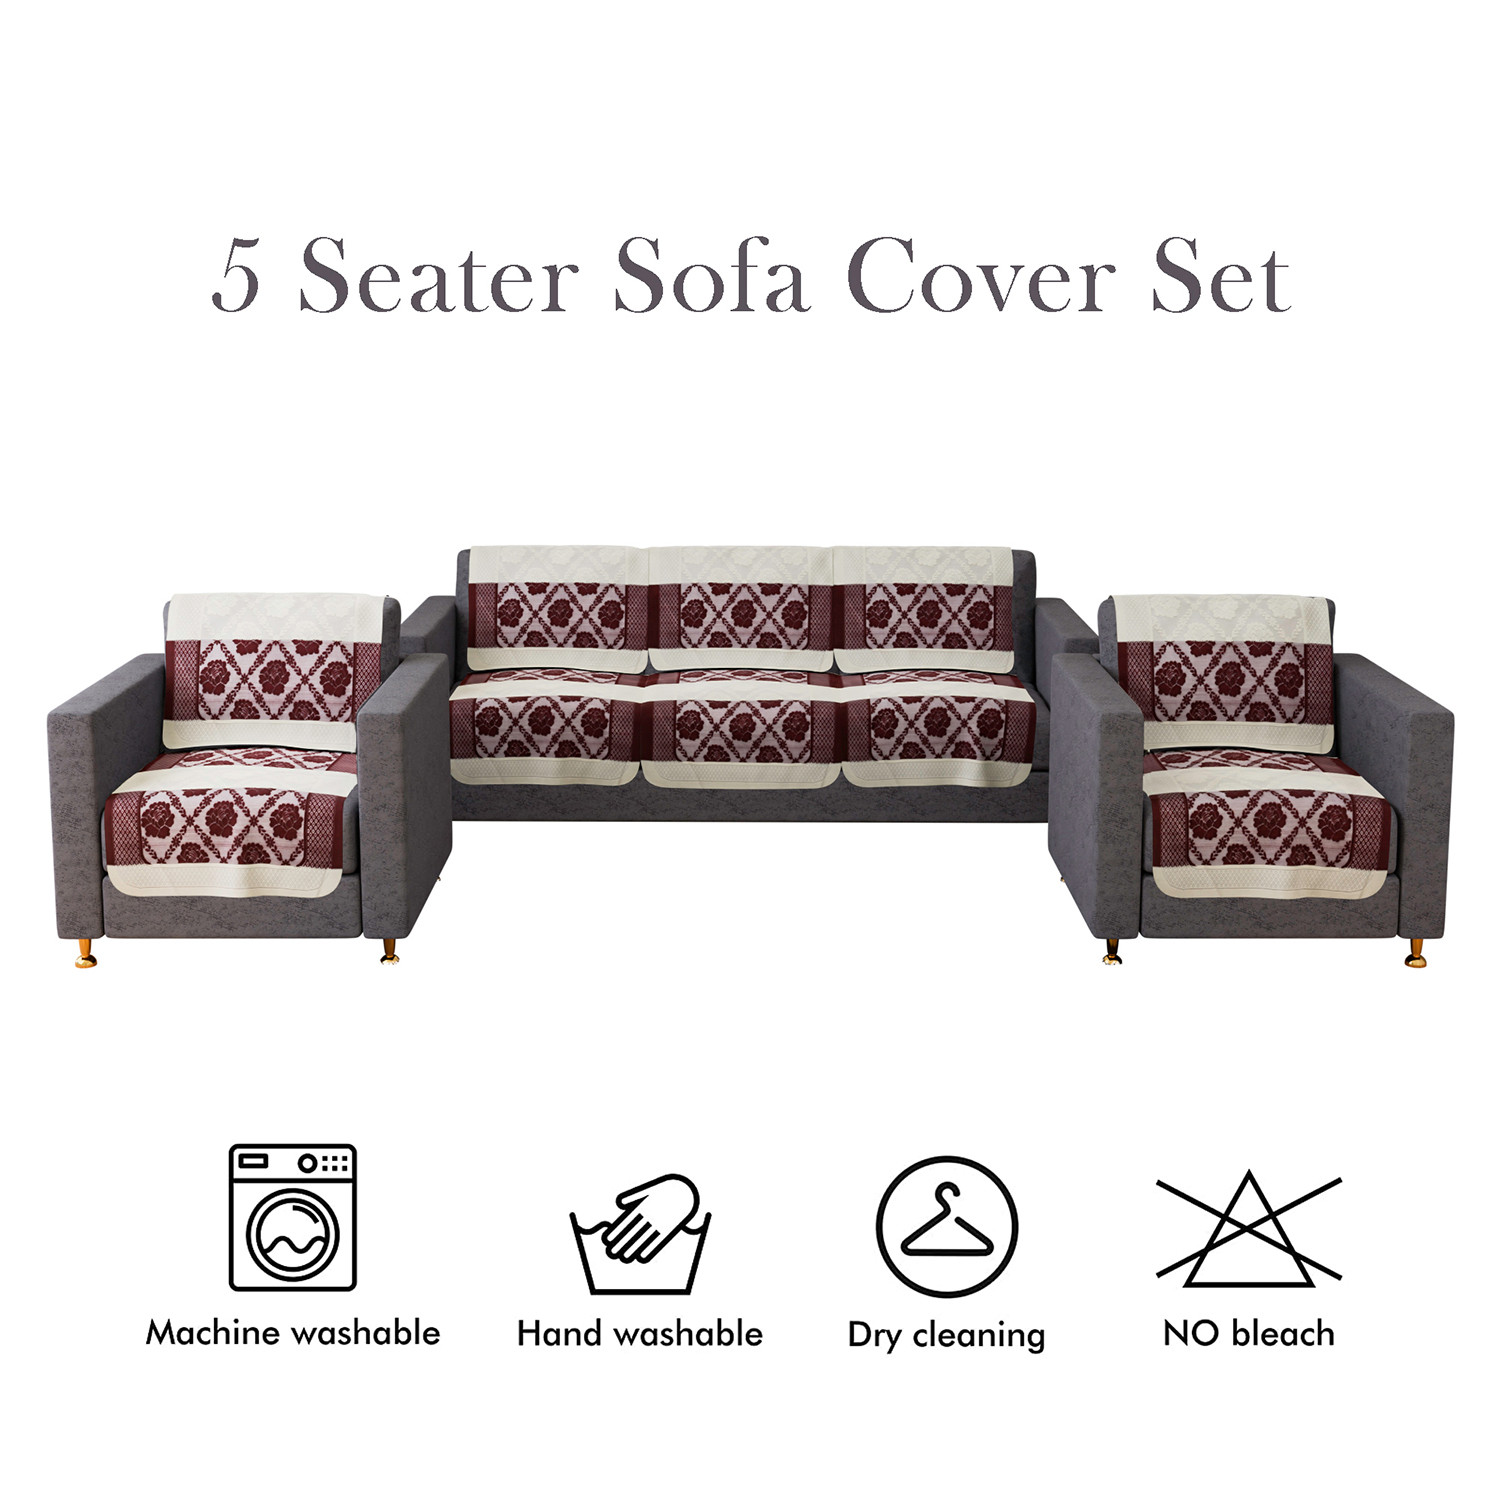 Kuber Industries Sofa Cover | Cotton Net Maroon Flower Patta Sofa Cover | 5-Seater Sofa Cover for Home Decor | Sofa cover Set for Living room | Maroon